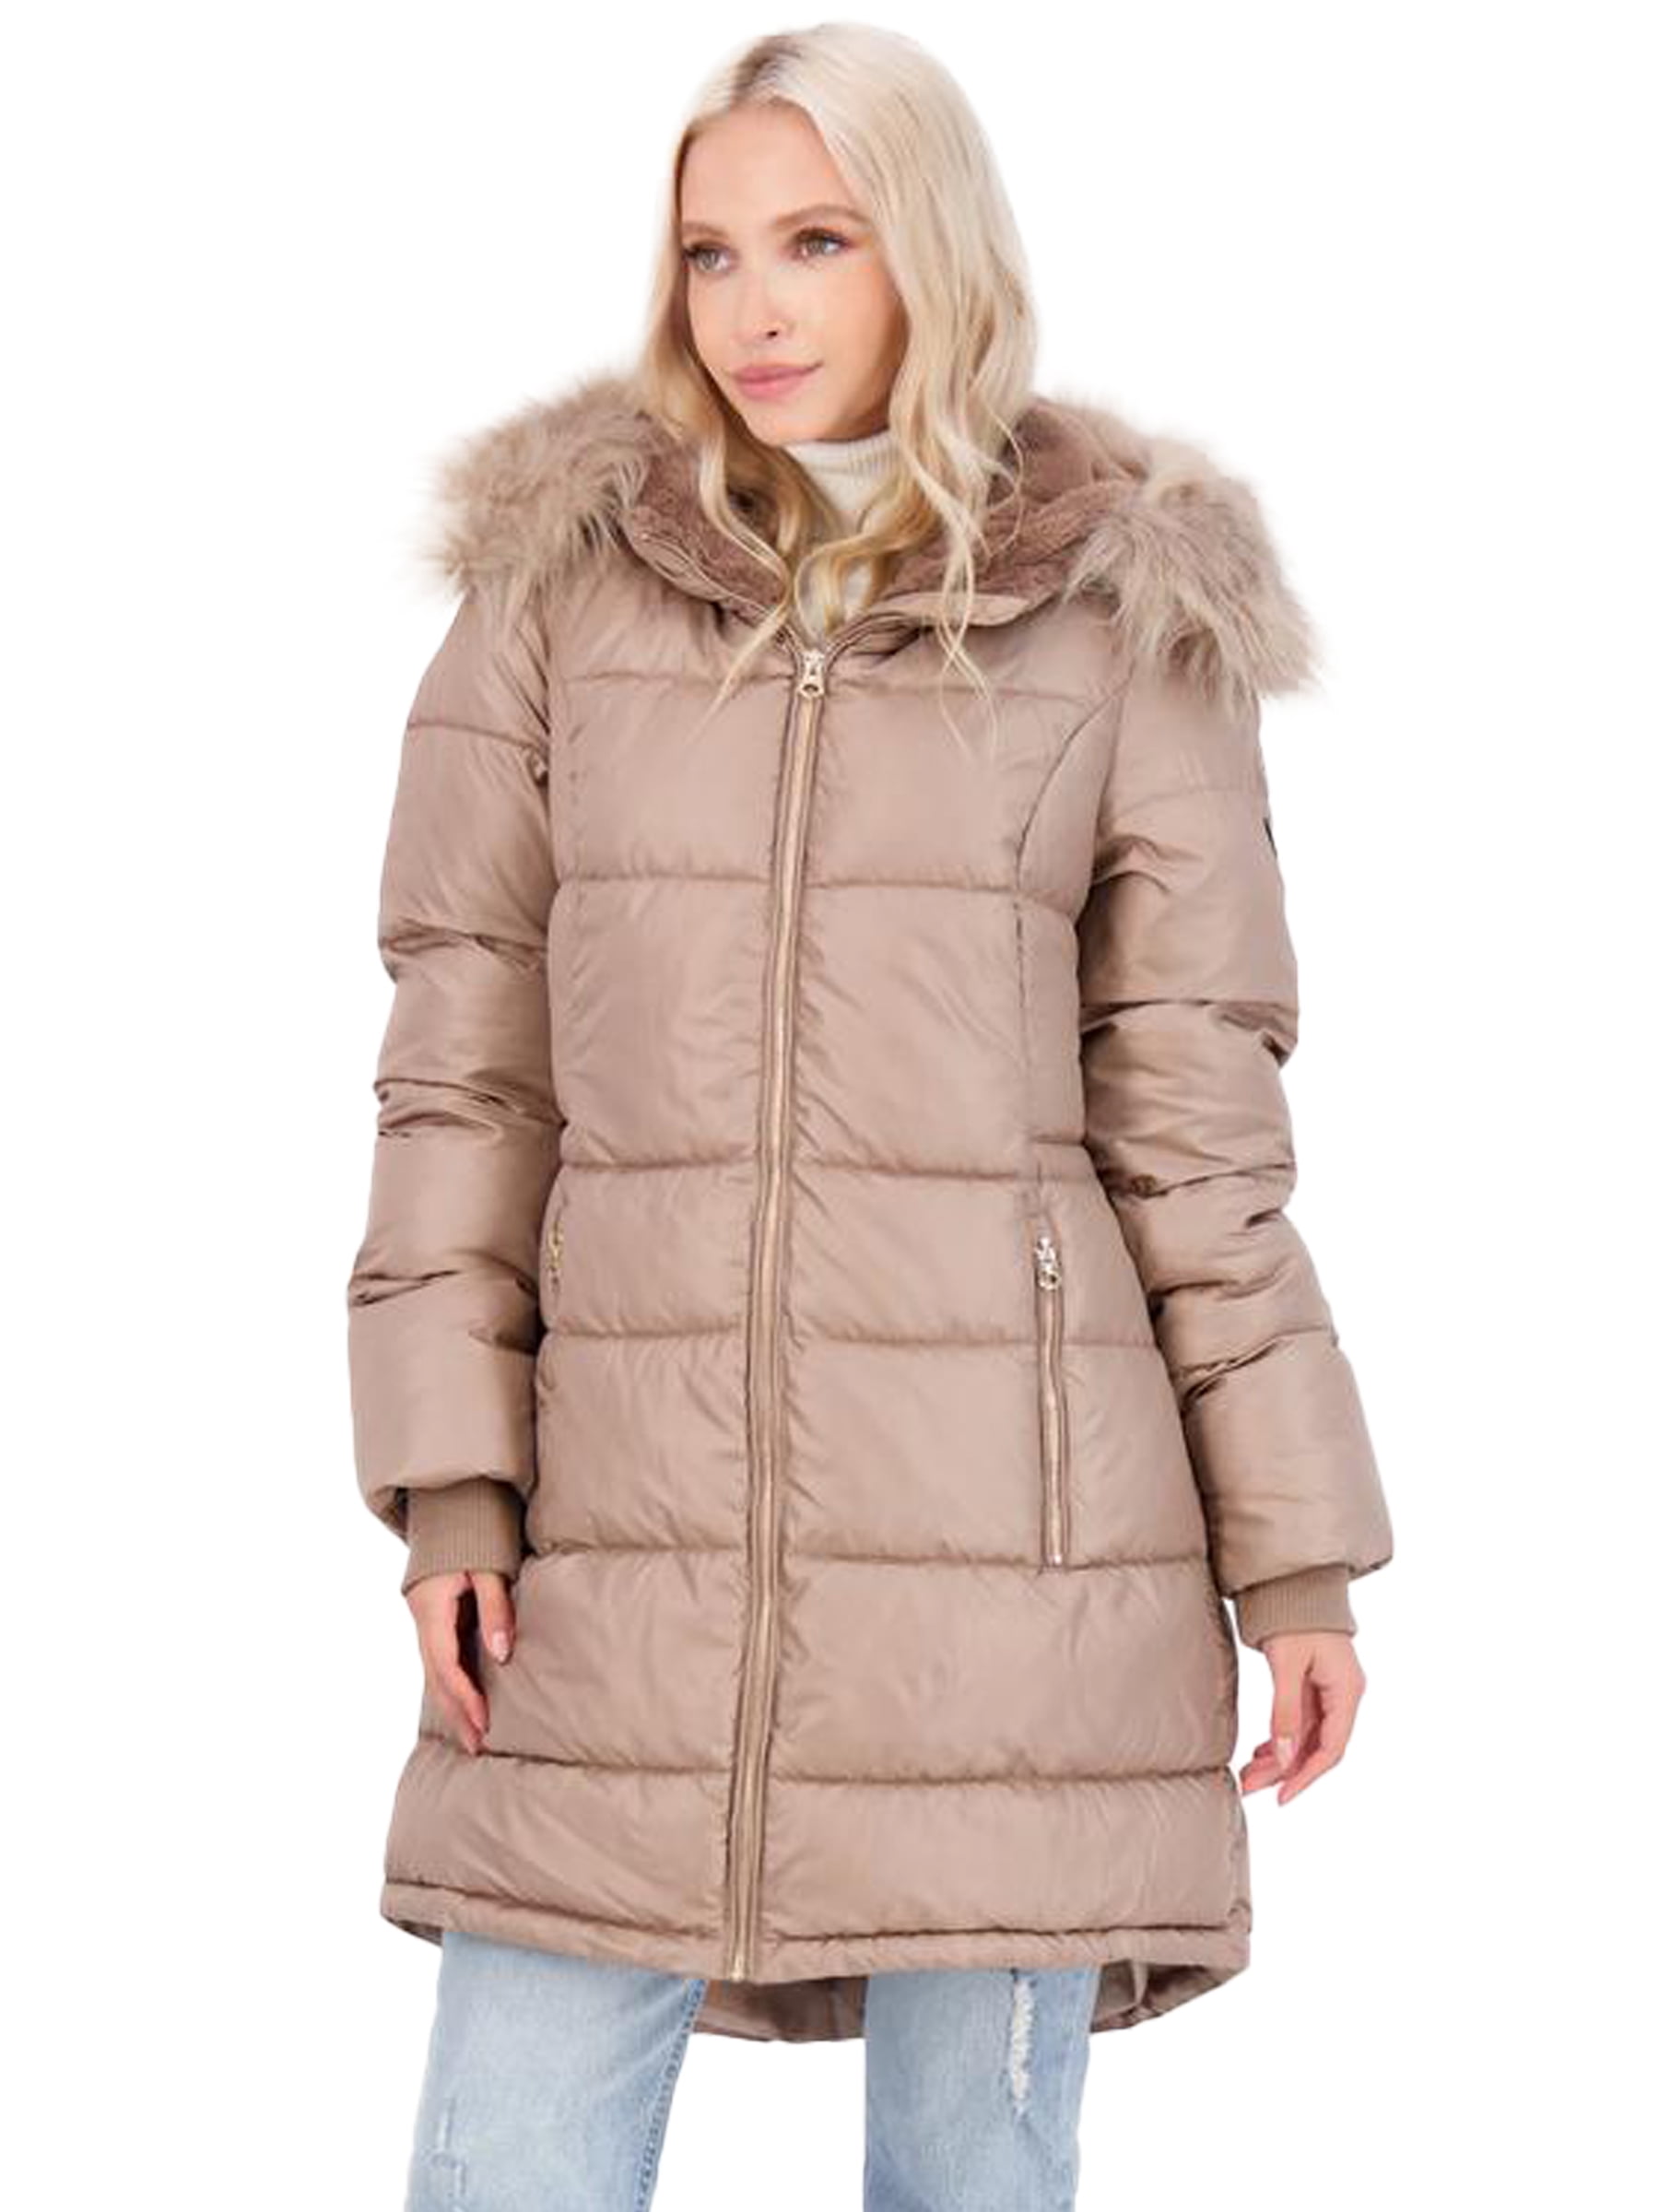 Jessica Simpson Puffer Coat For Women - Quilted Winter Coat w/ Faux Fur ...